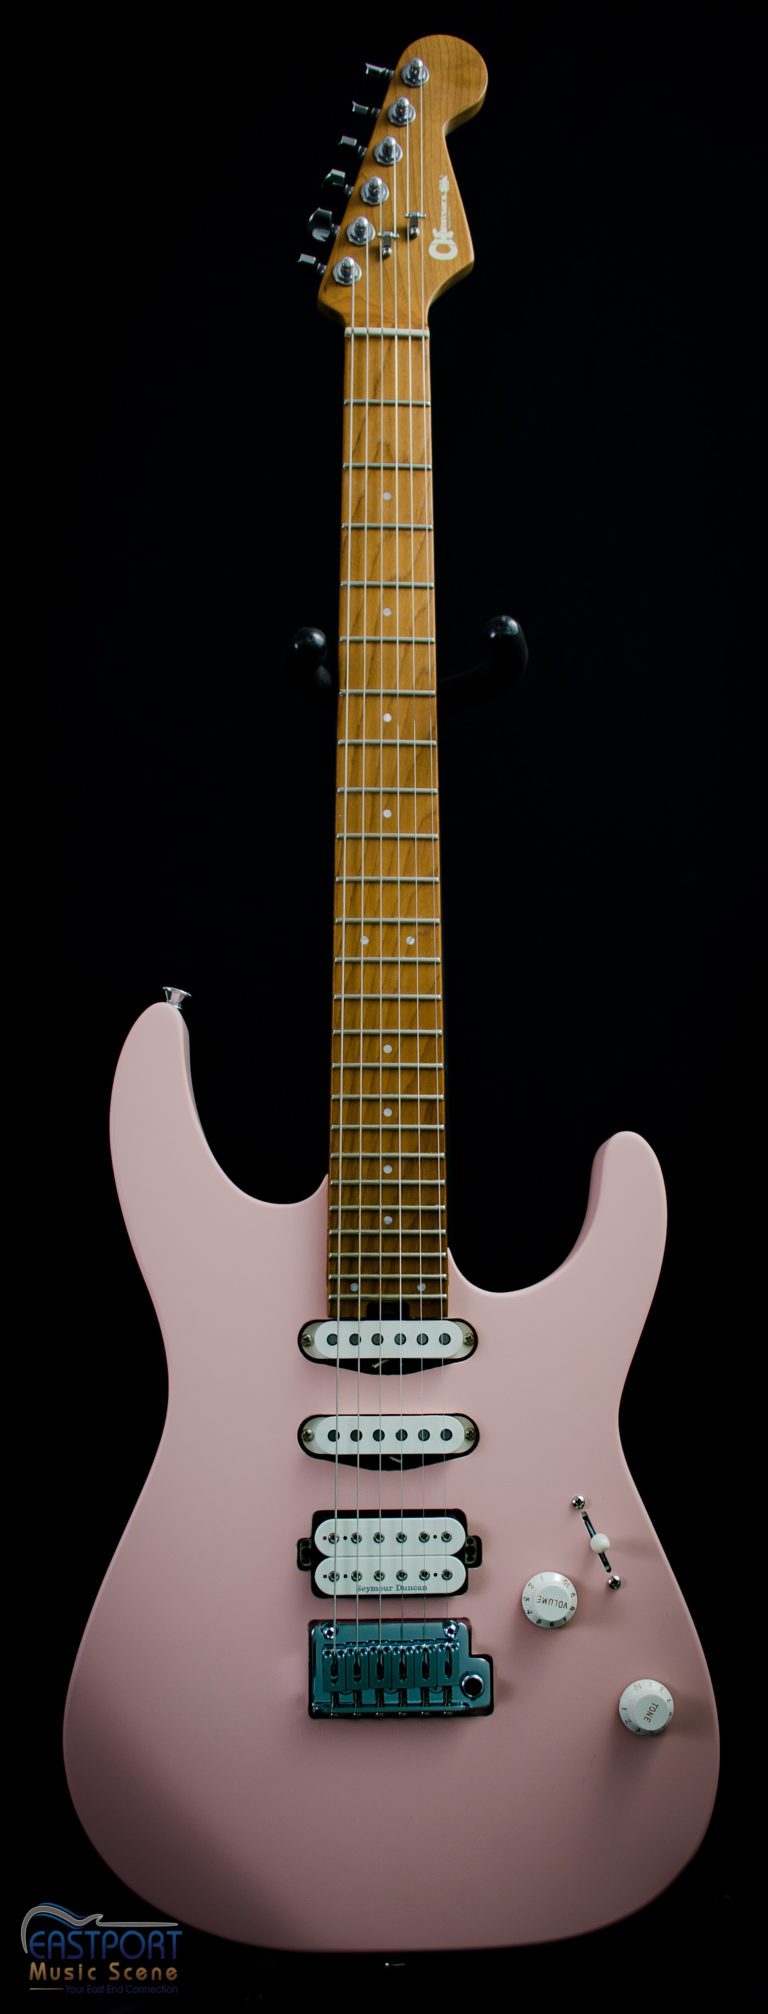 A pink electric guitar with the strings missing.